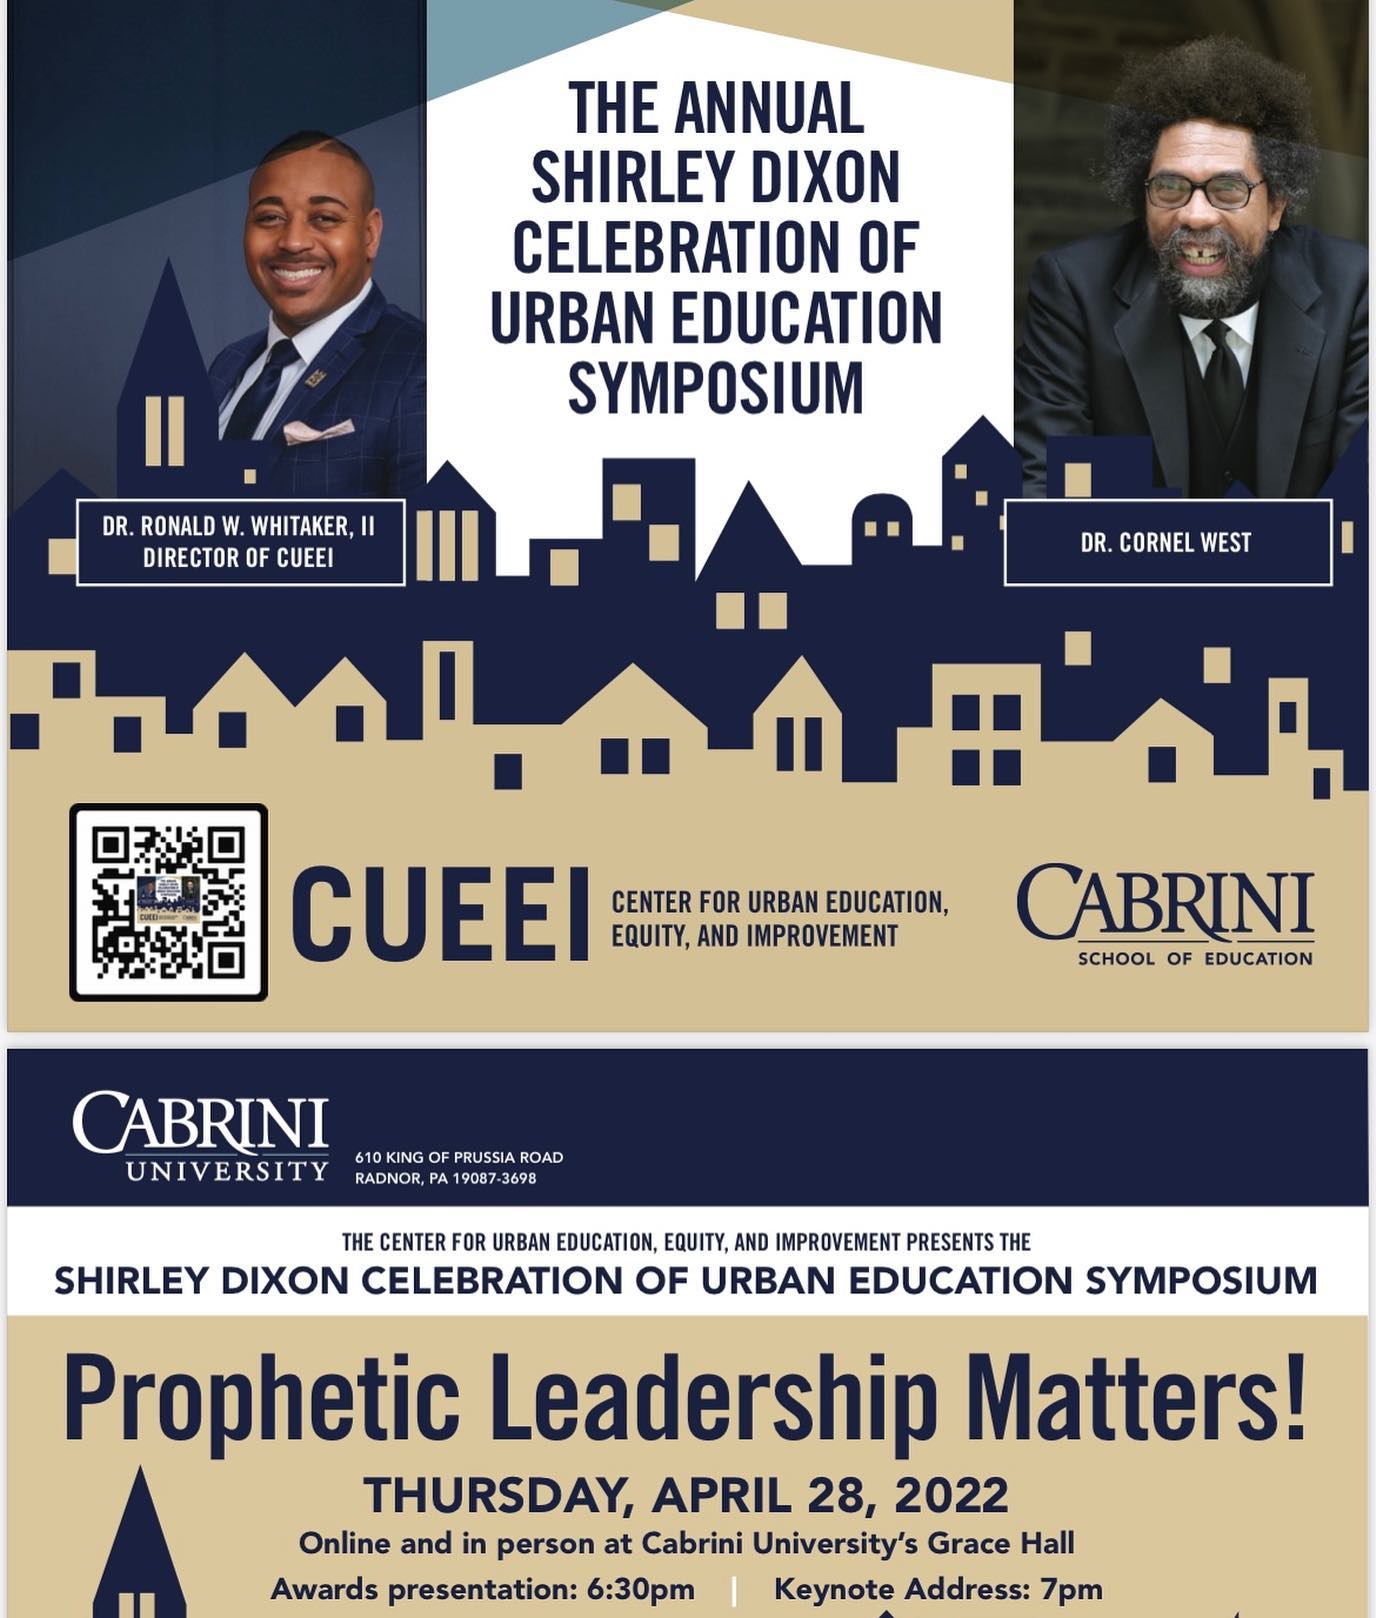 This Thursday @Cueeicu is hosting @brothercornelwest for The Annual Shirley Dixon Celebration of Urban Education Symposium! Join them in Grace hall or online at 6:30pm Check out the link in our bio to learn all about Dr.West and to hear all about the events that are happening on campus while the semester is winding down! Link in story
#Loquitur#CabriniUniversity#Cabrini#studentnews#newspaper
#collegenewspaper#cornelwest#urbaneudcationsyposium